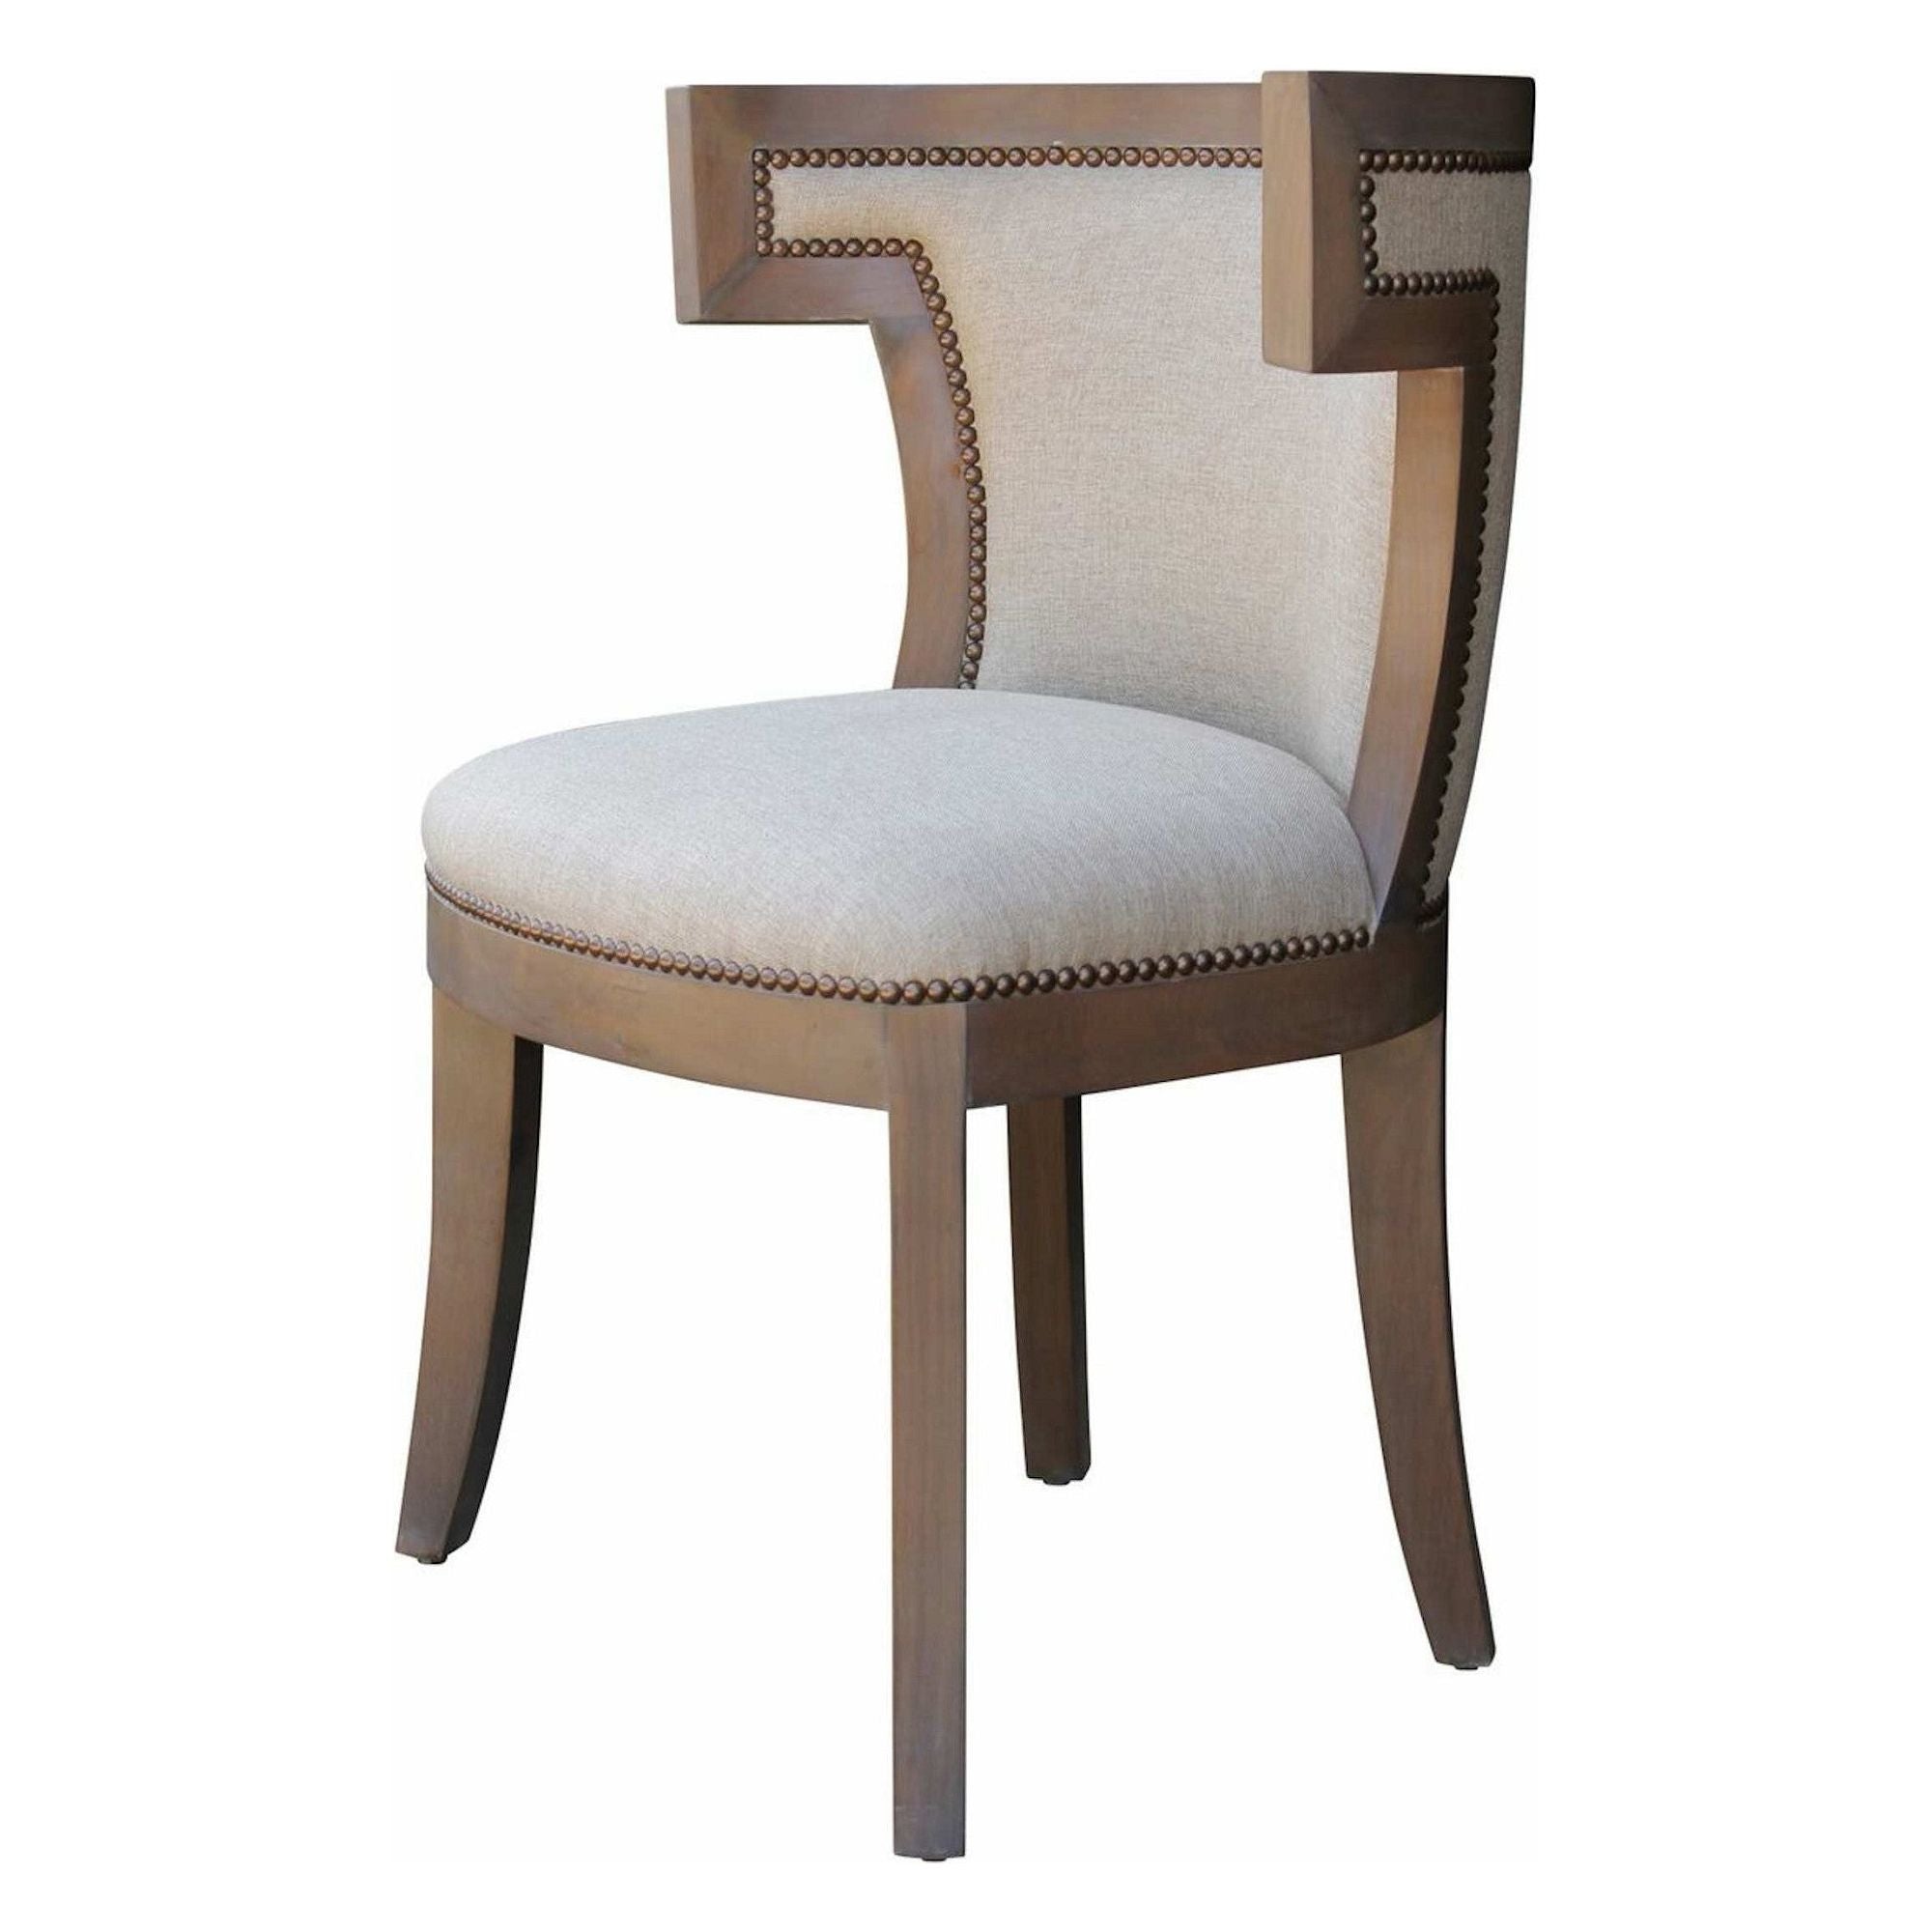 Custom Dining Room Chairs For Every Home Interior Design Style From Modern Chairs